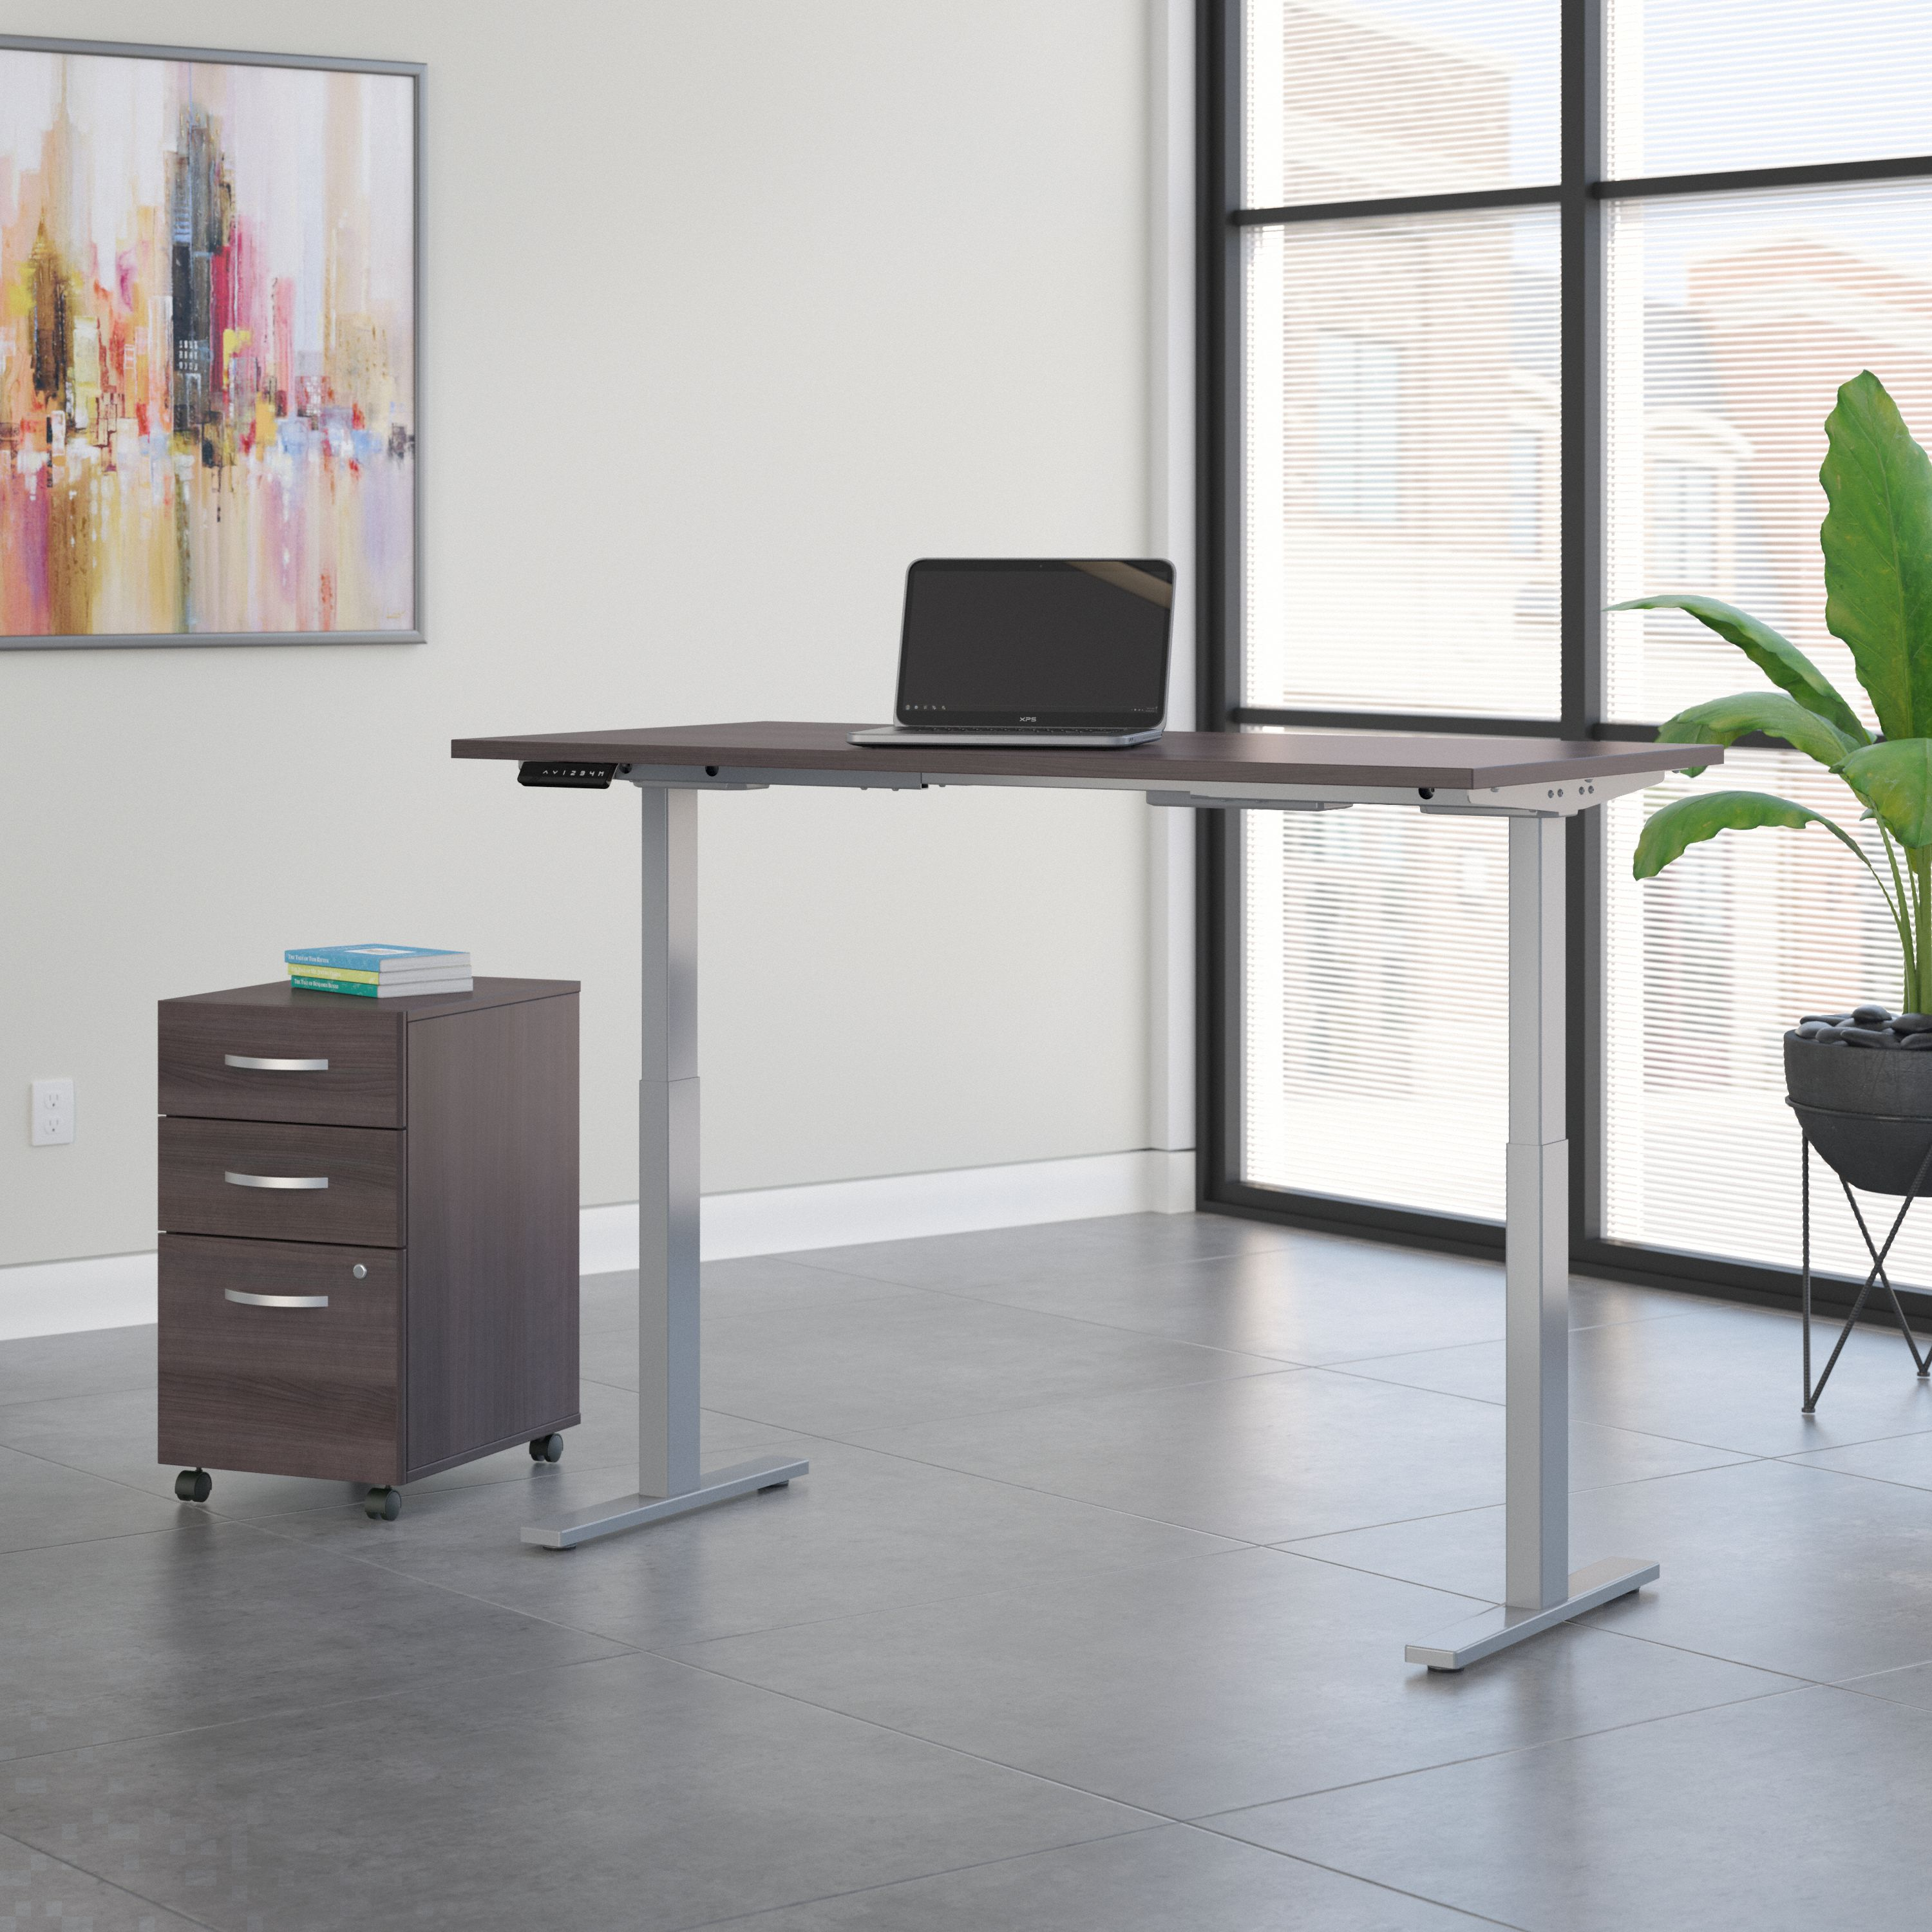 Shop Move 60 Series by Bush Business Furniture 60W x 30D Height Adjustable Standing Desk with Storage 01 M6S011SGSU #color_storm gray/cool gray metallic